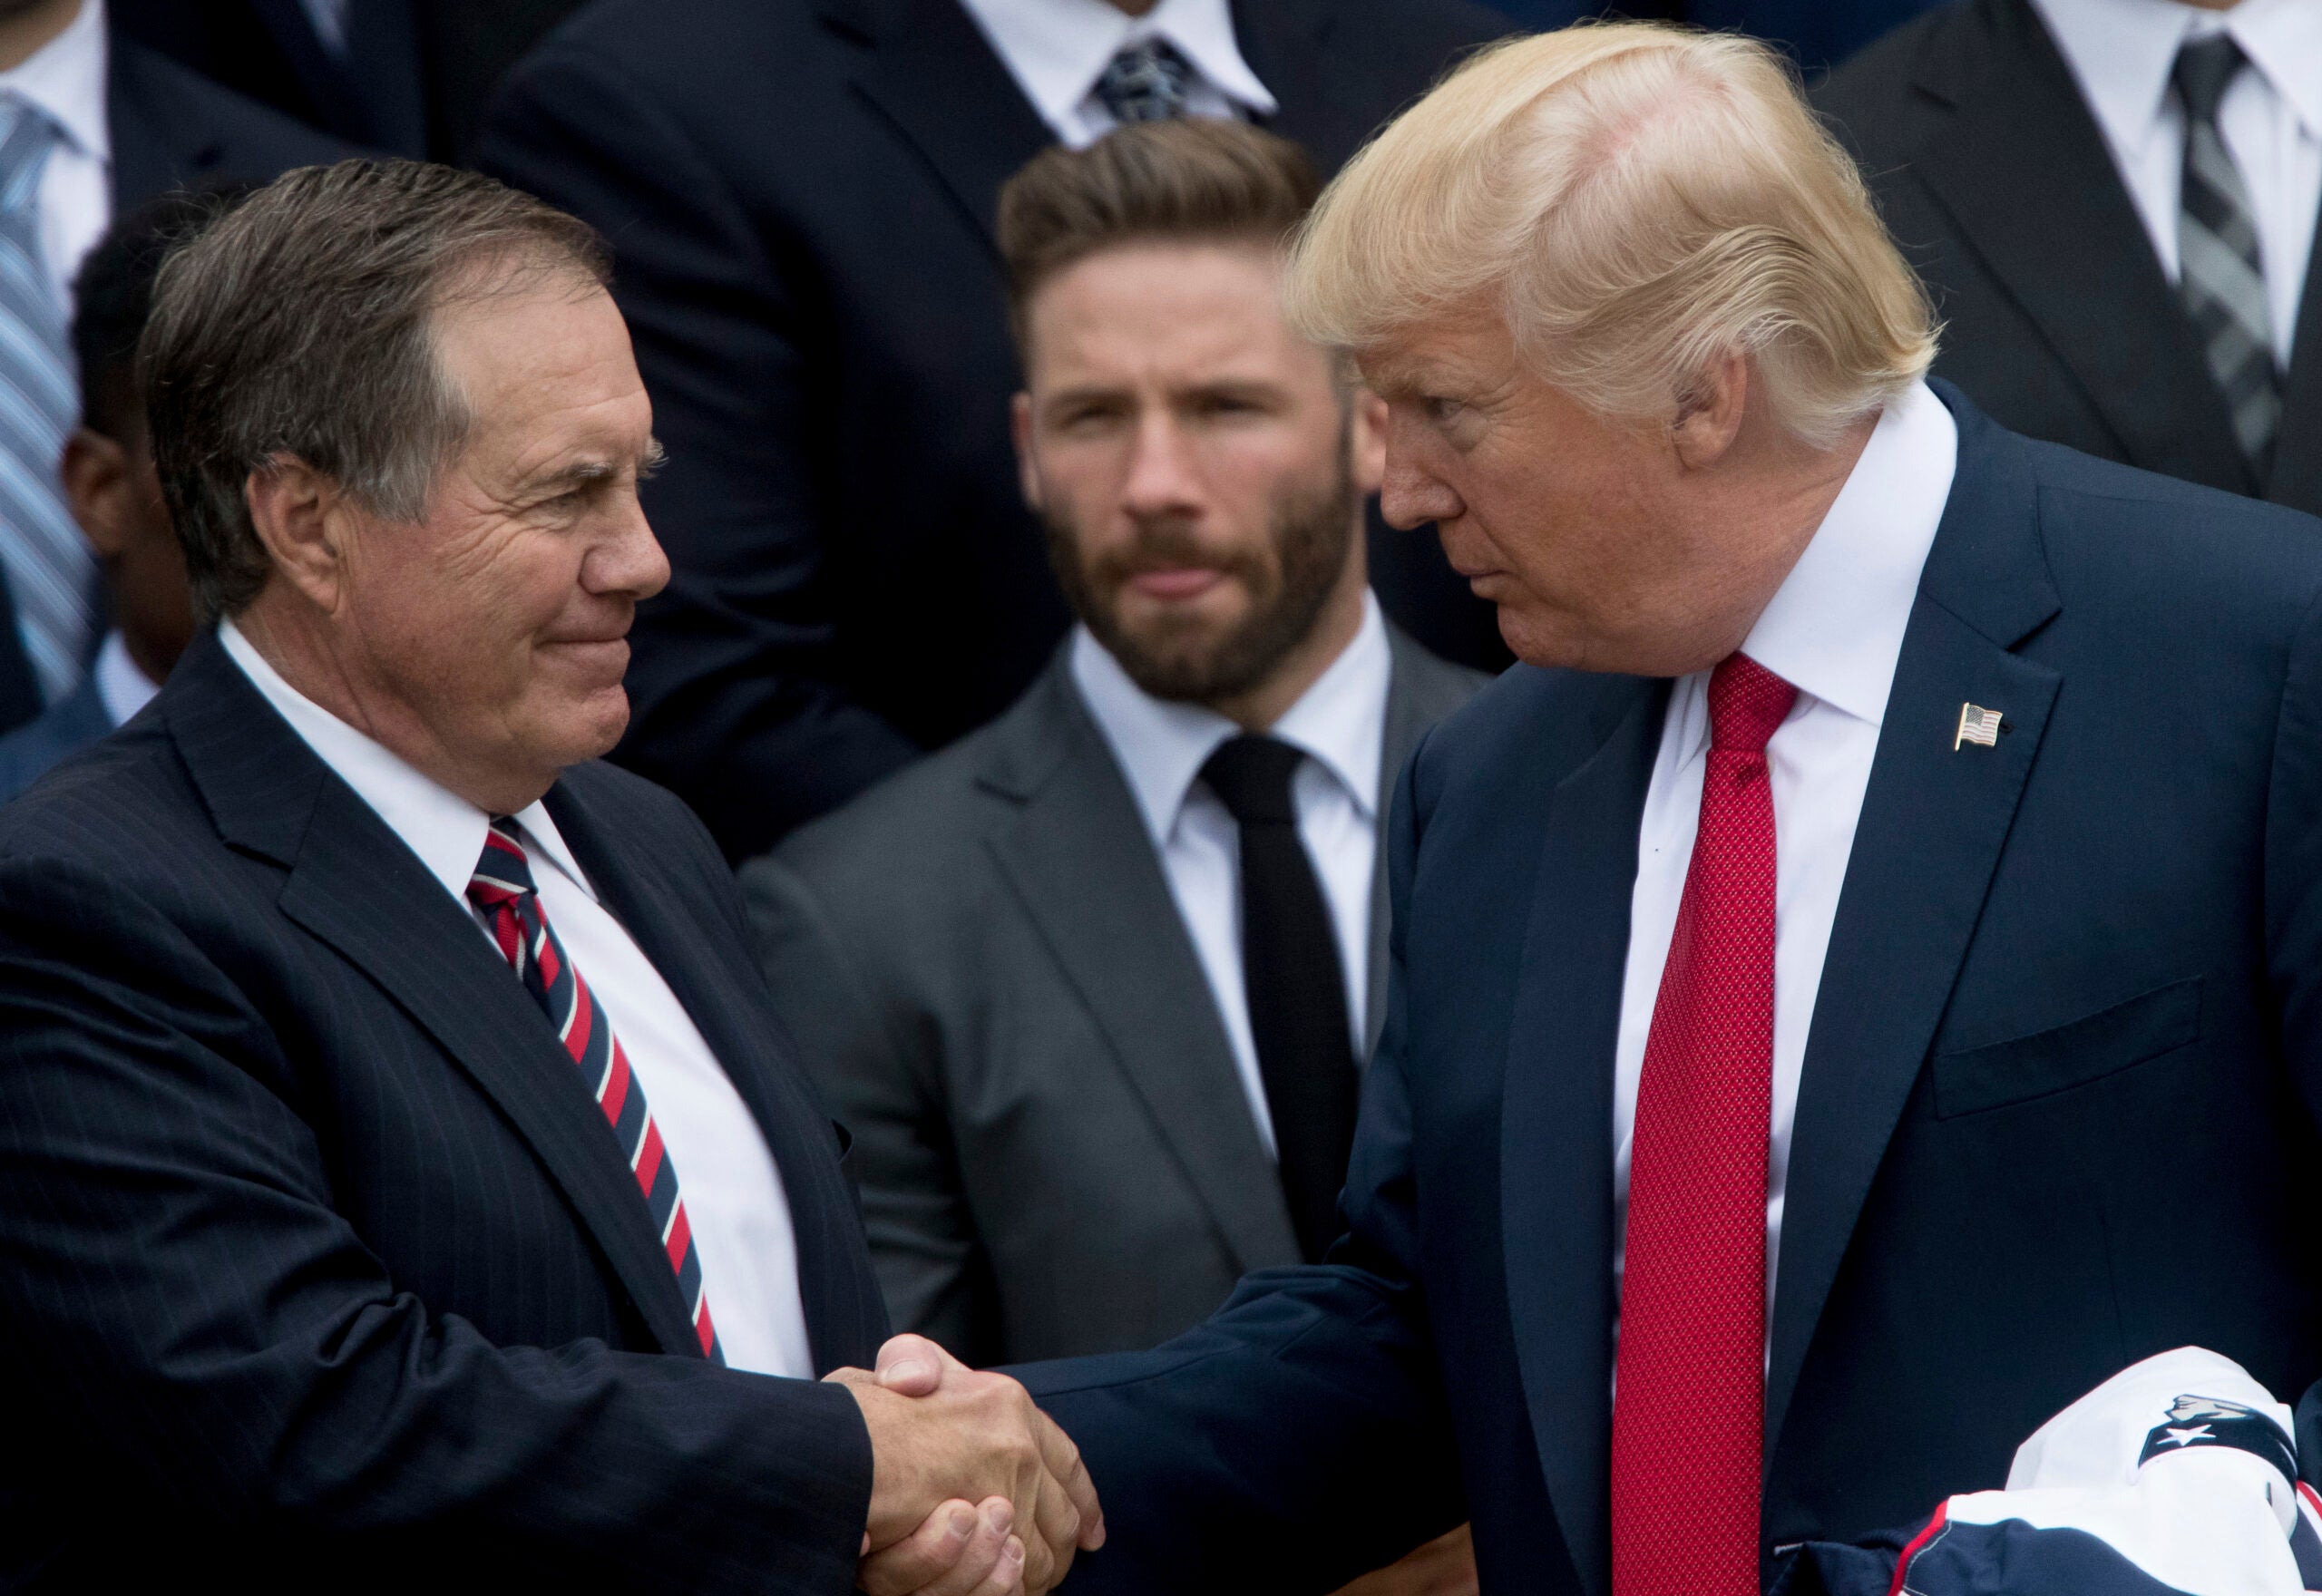 Belichick Trump medal of freedom offer